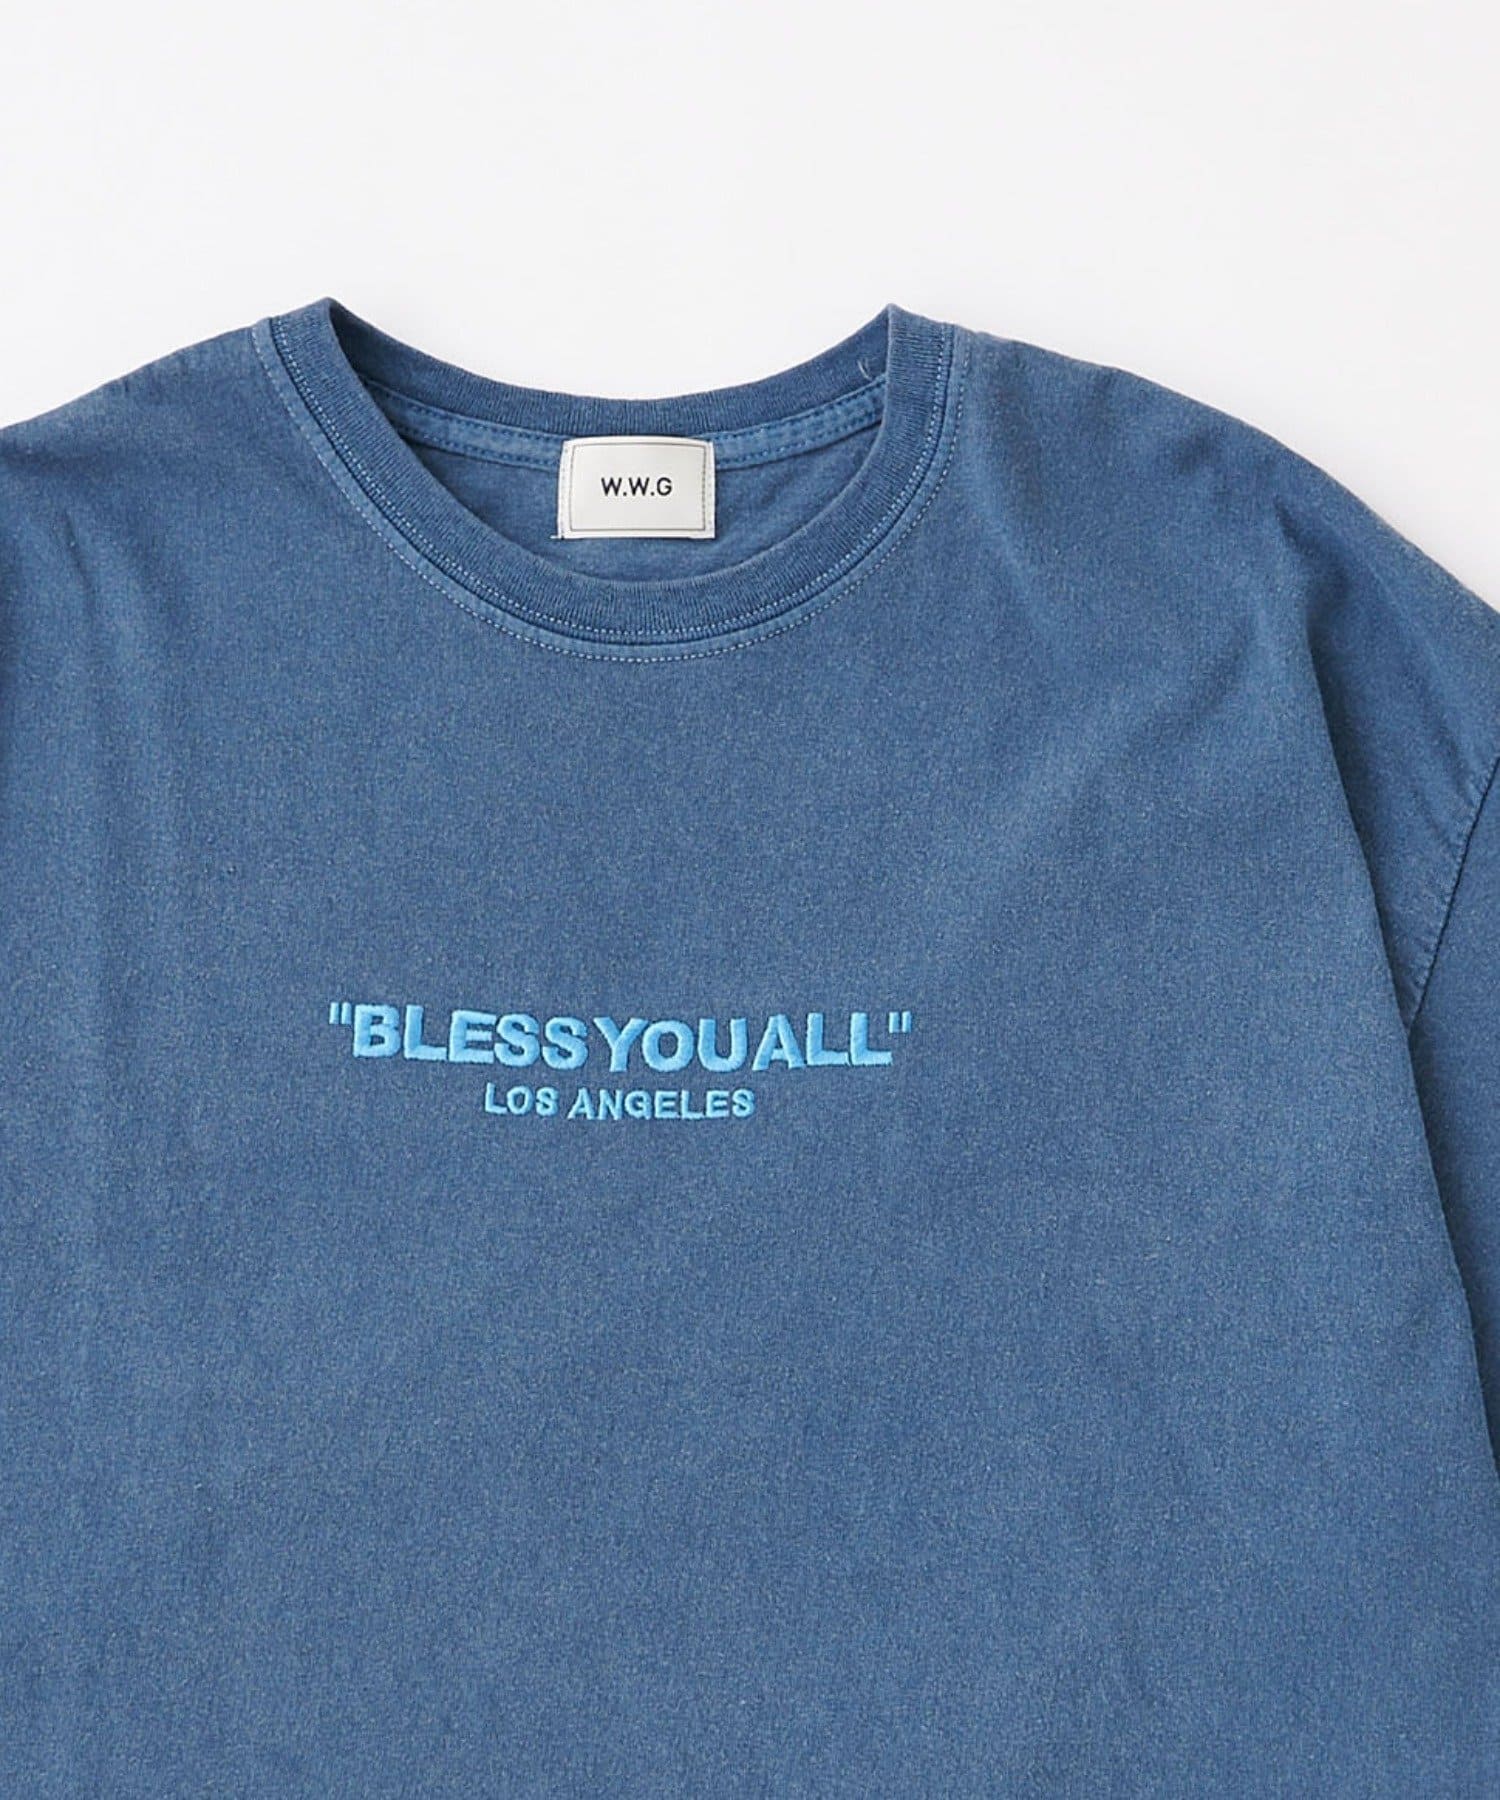 WHO’S WHO gallery(フーズフーギャラリー) 【BLESS YOU/ブレスユー】ピグメント刺繍ロゴTEE